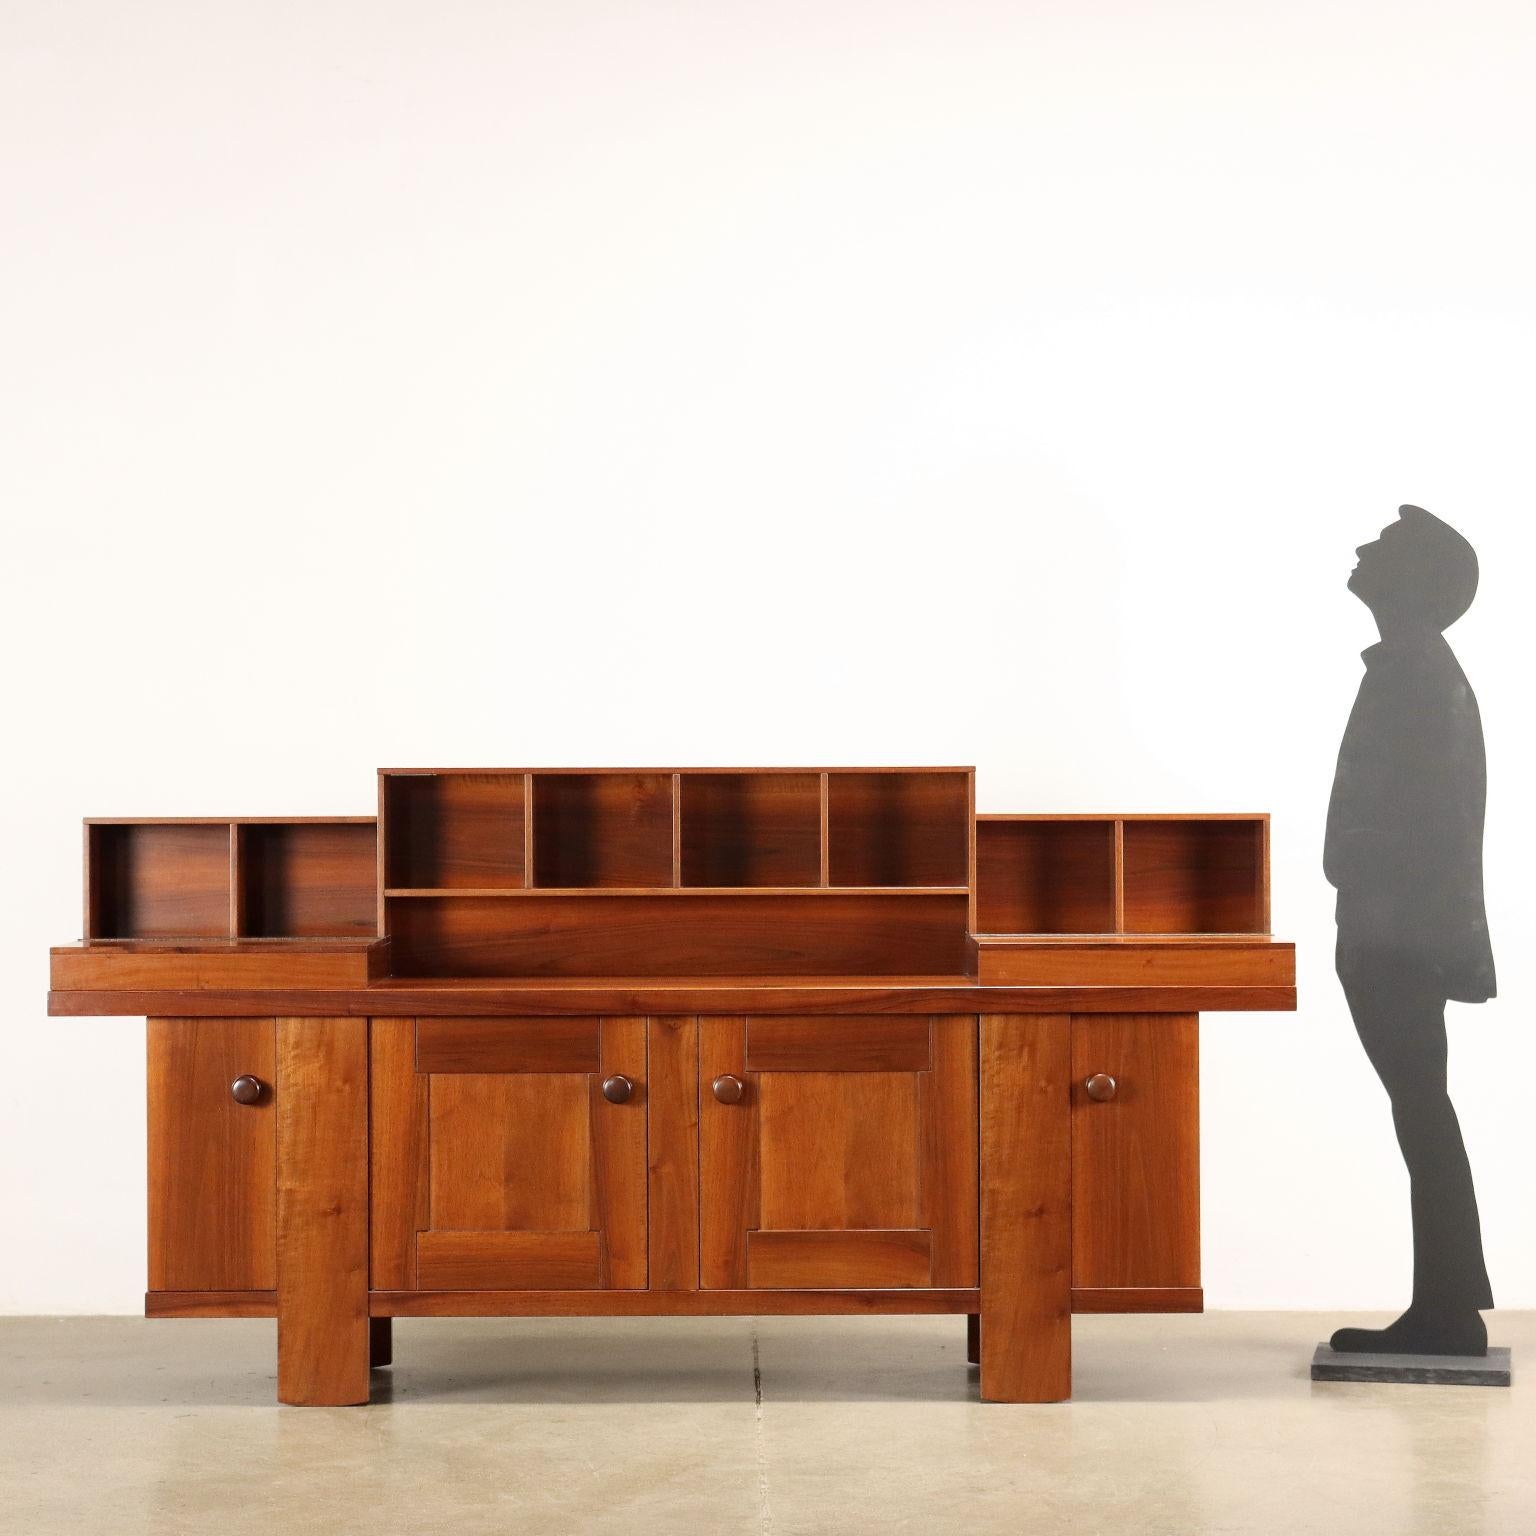 Sideboard with top and open compartments in national walnut veneered wood.